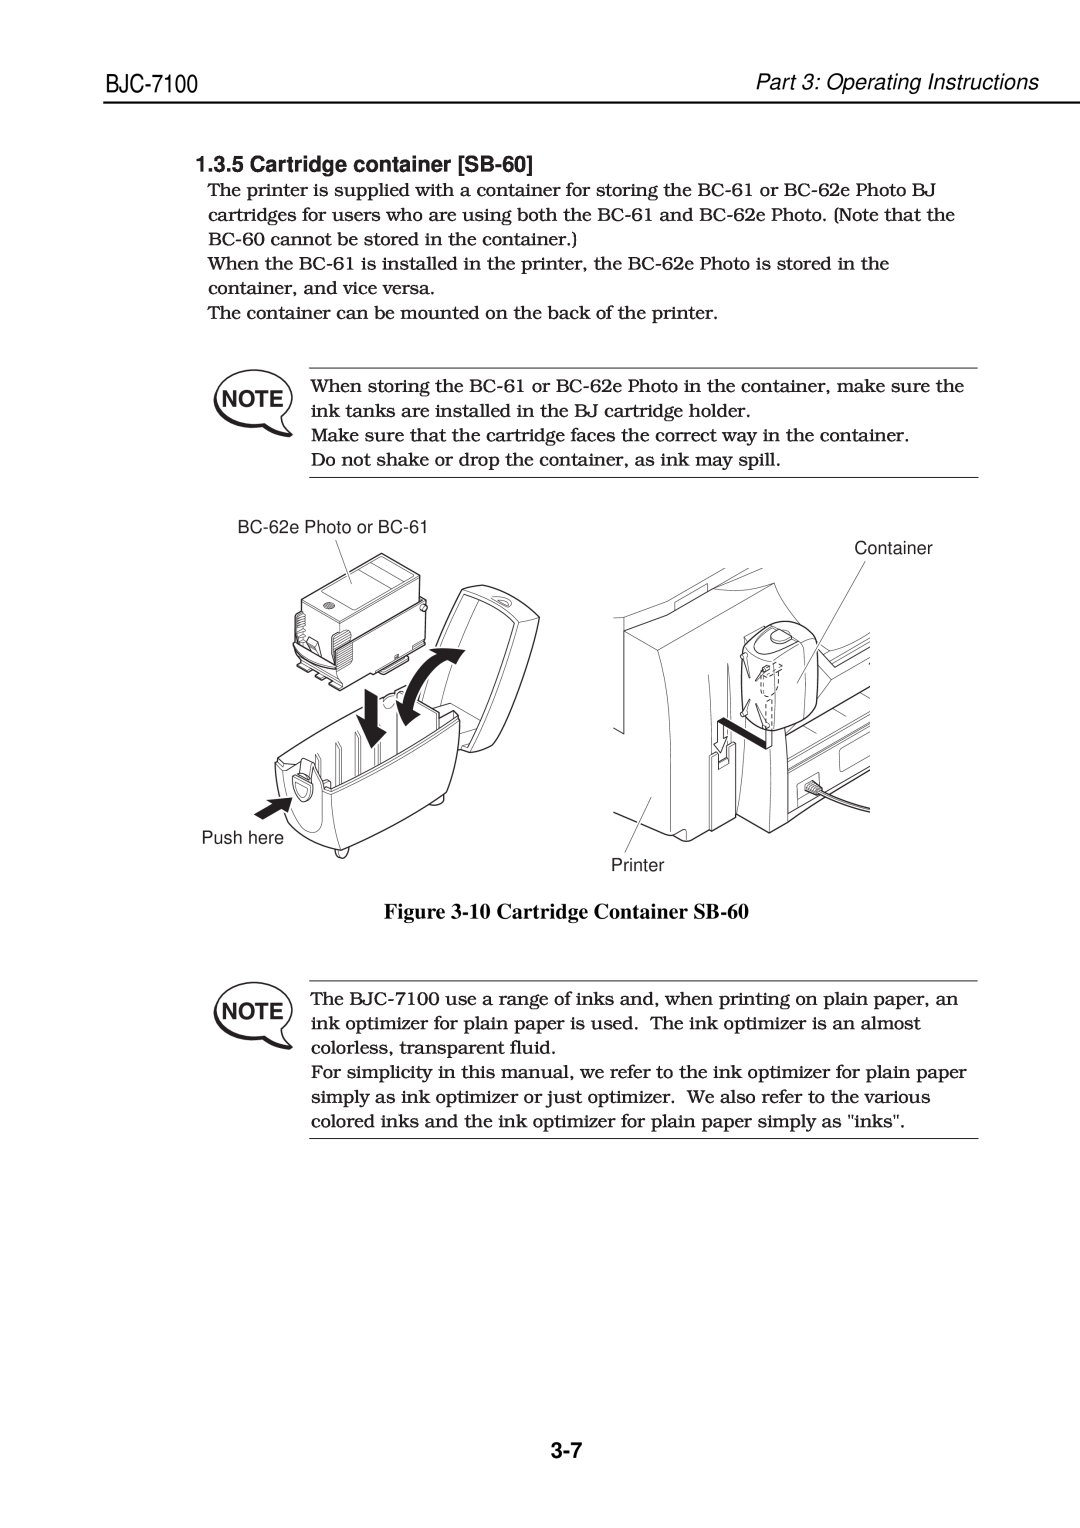 Canon QY8-1360-000 manual Cartridge container SB-60, 10 Cartridge Container SB-60, BJC-7100, Part 3 Operating Instructions 